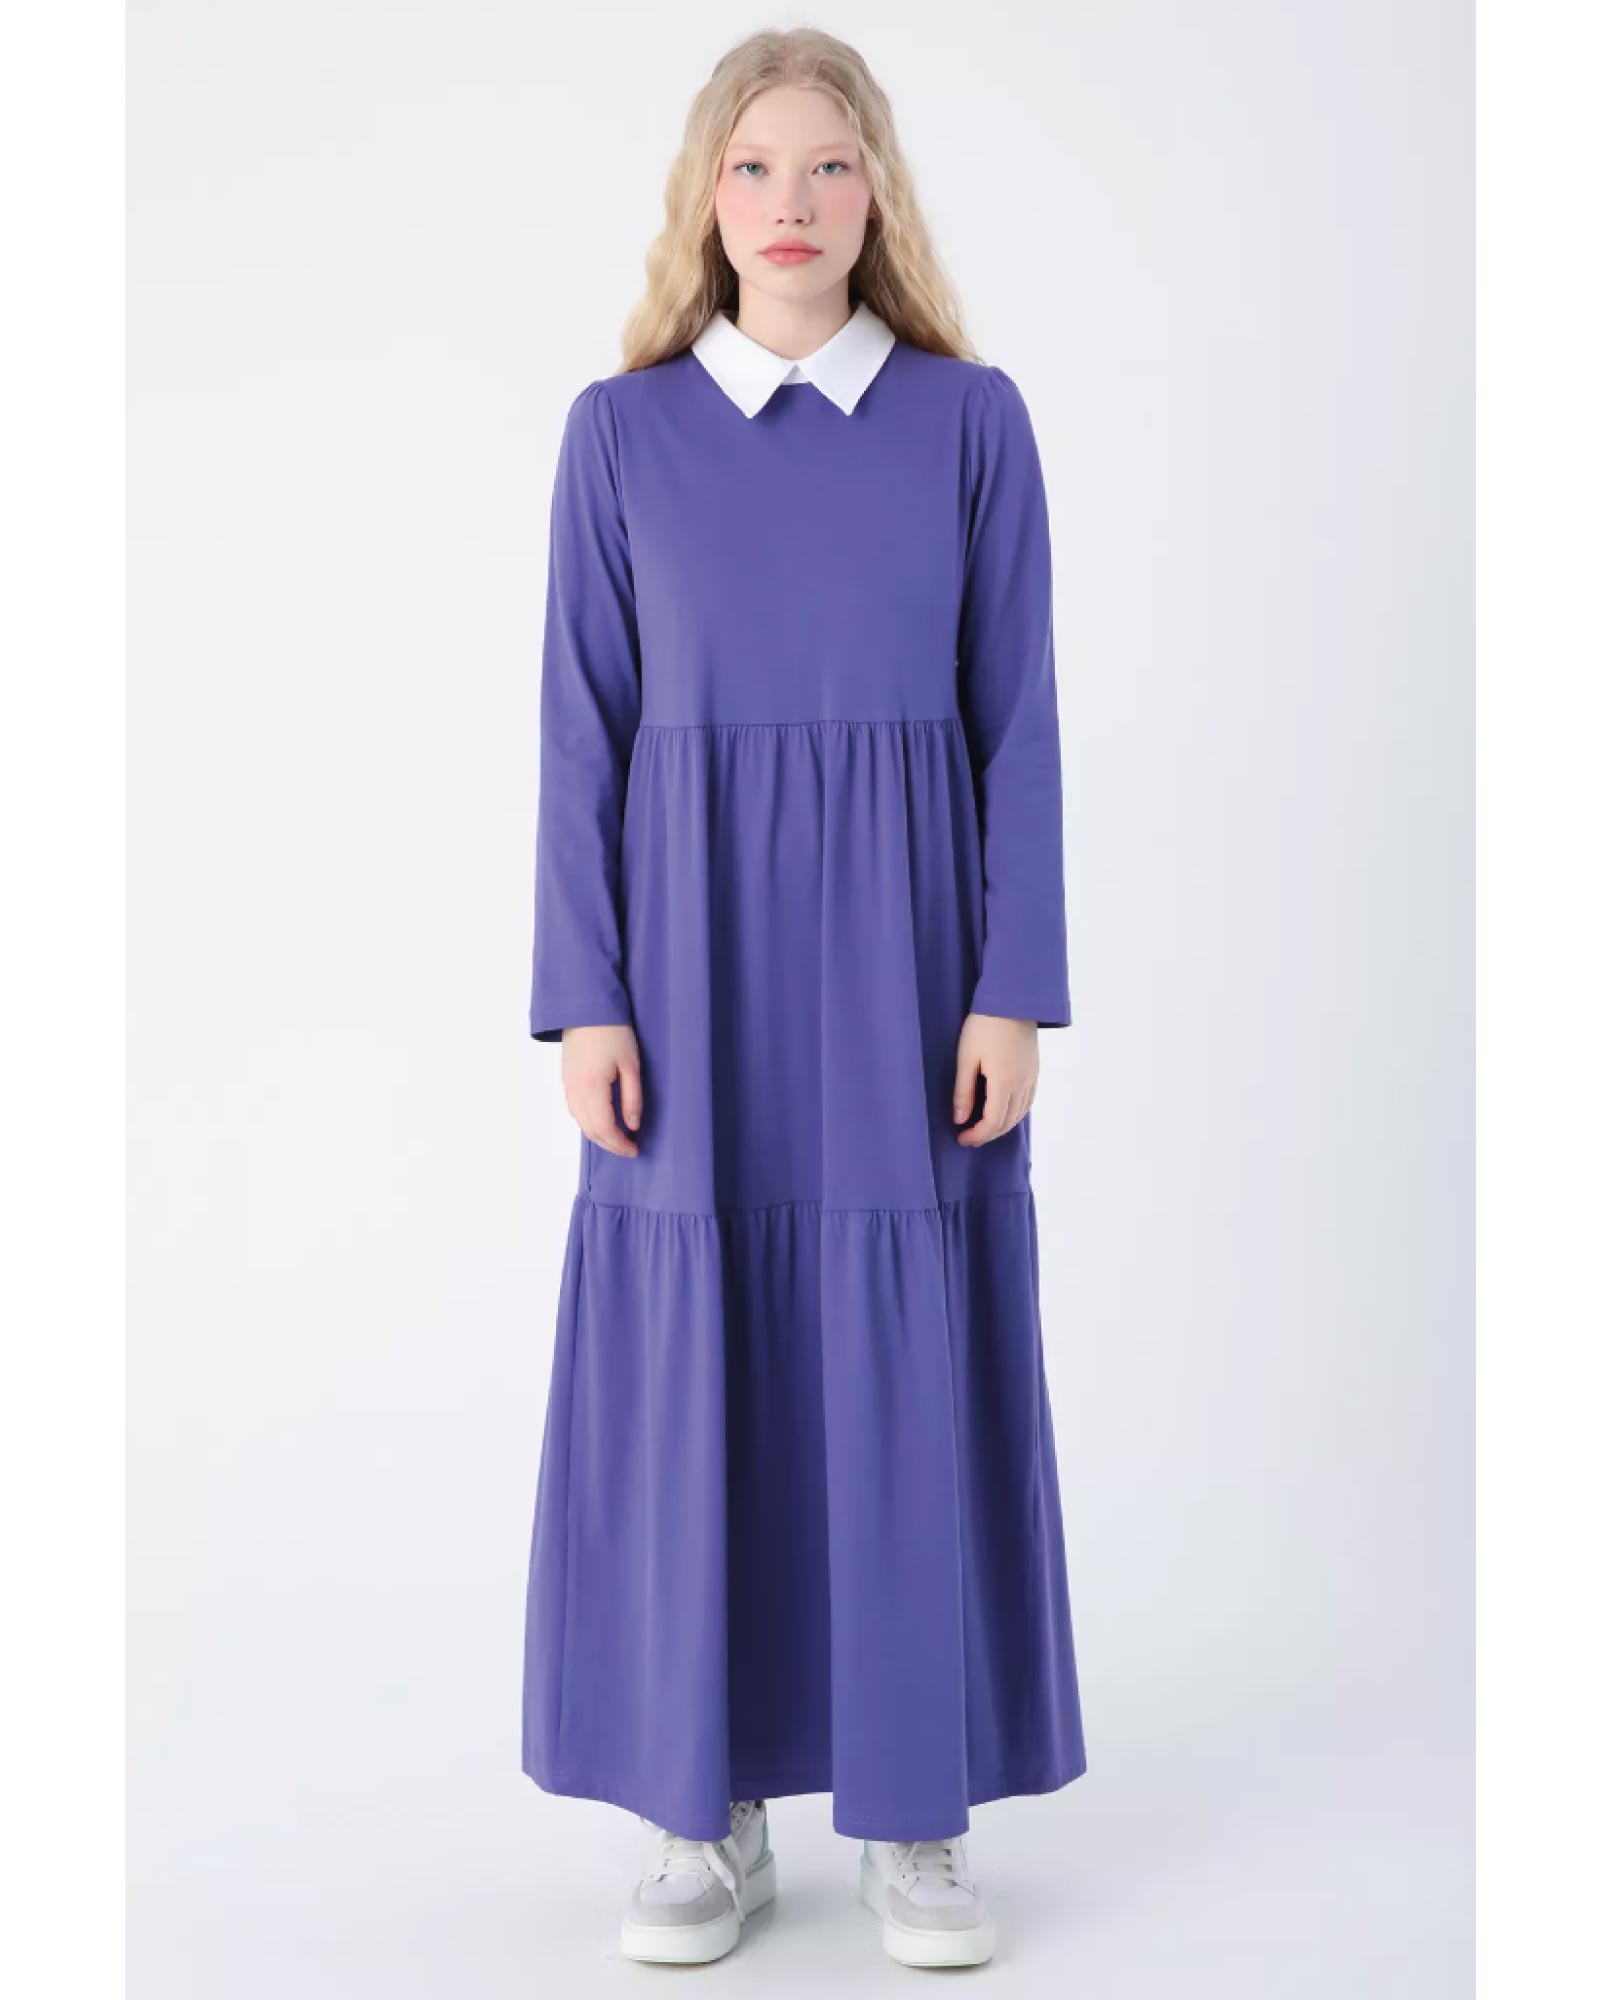 Hijab Dress Cotton dress with a classic shirt collar, practical pockets and charming ruffles